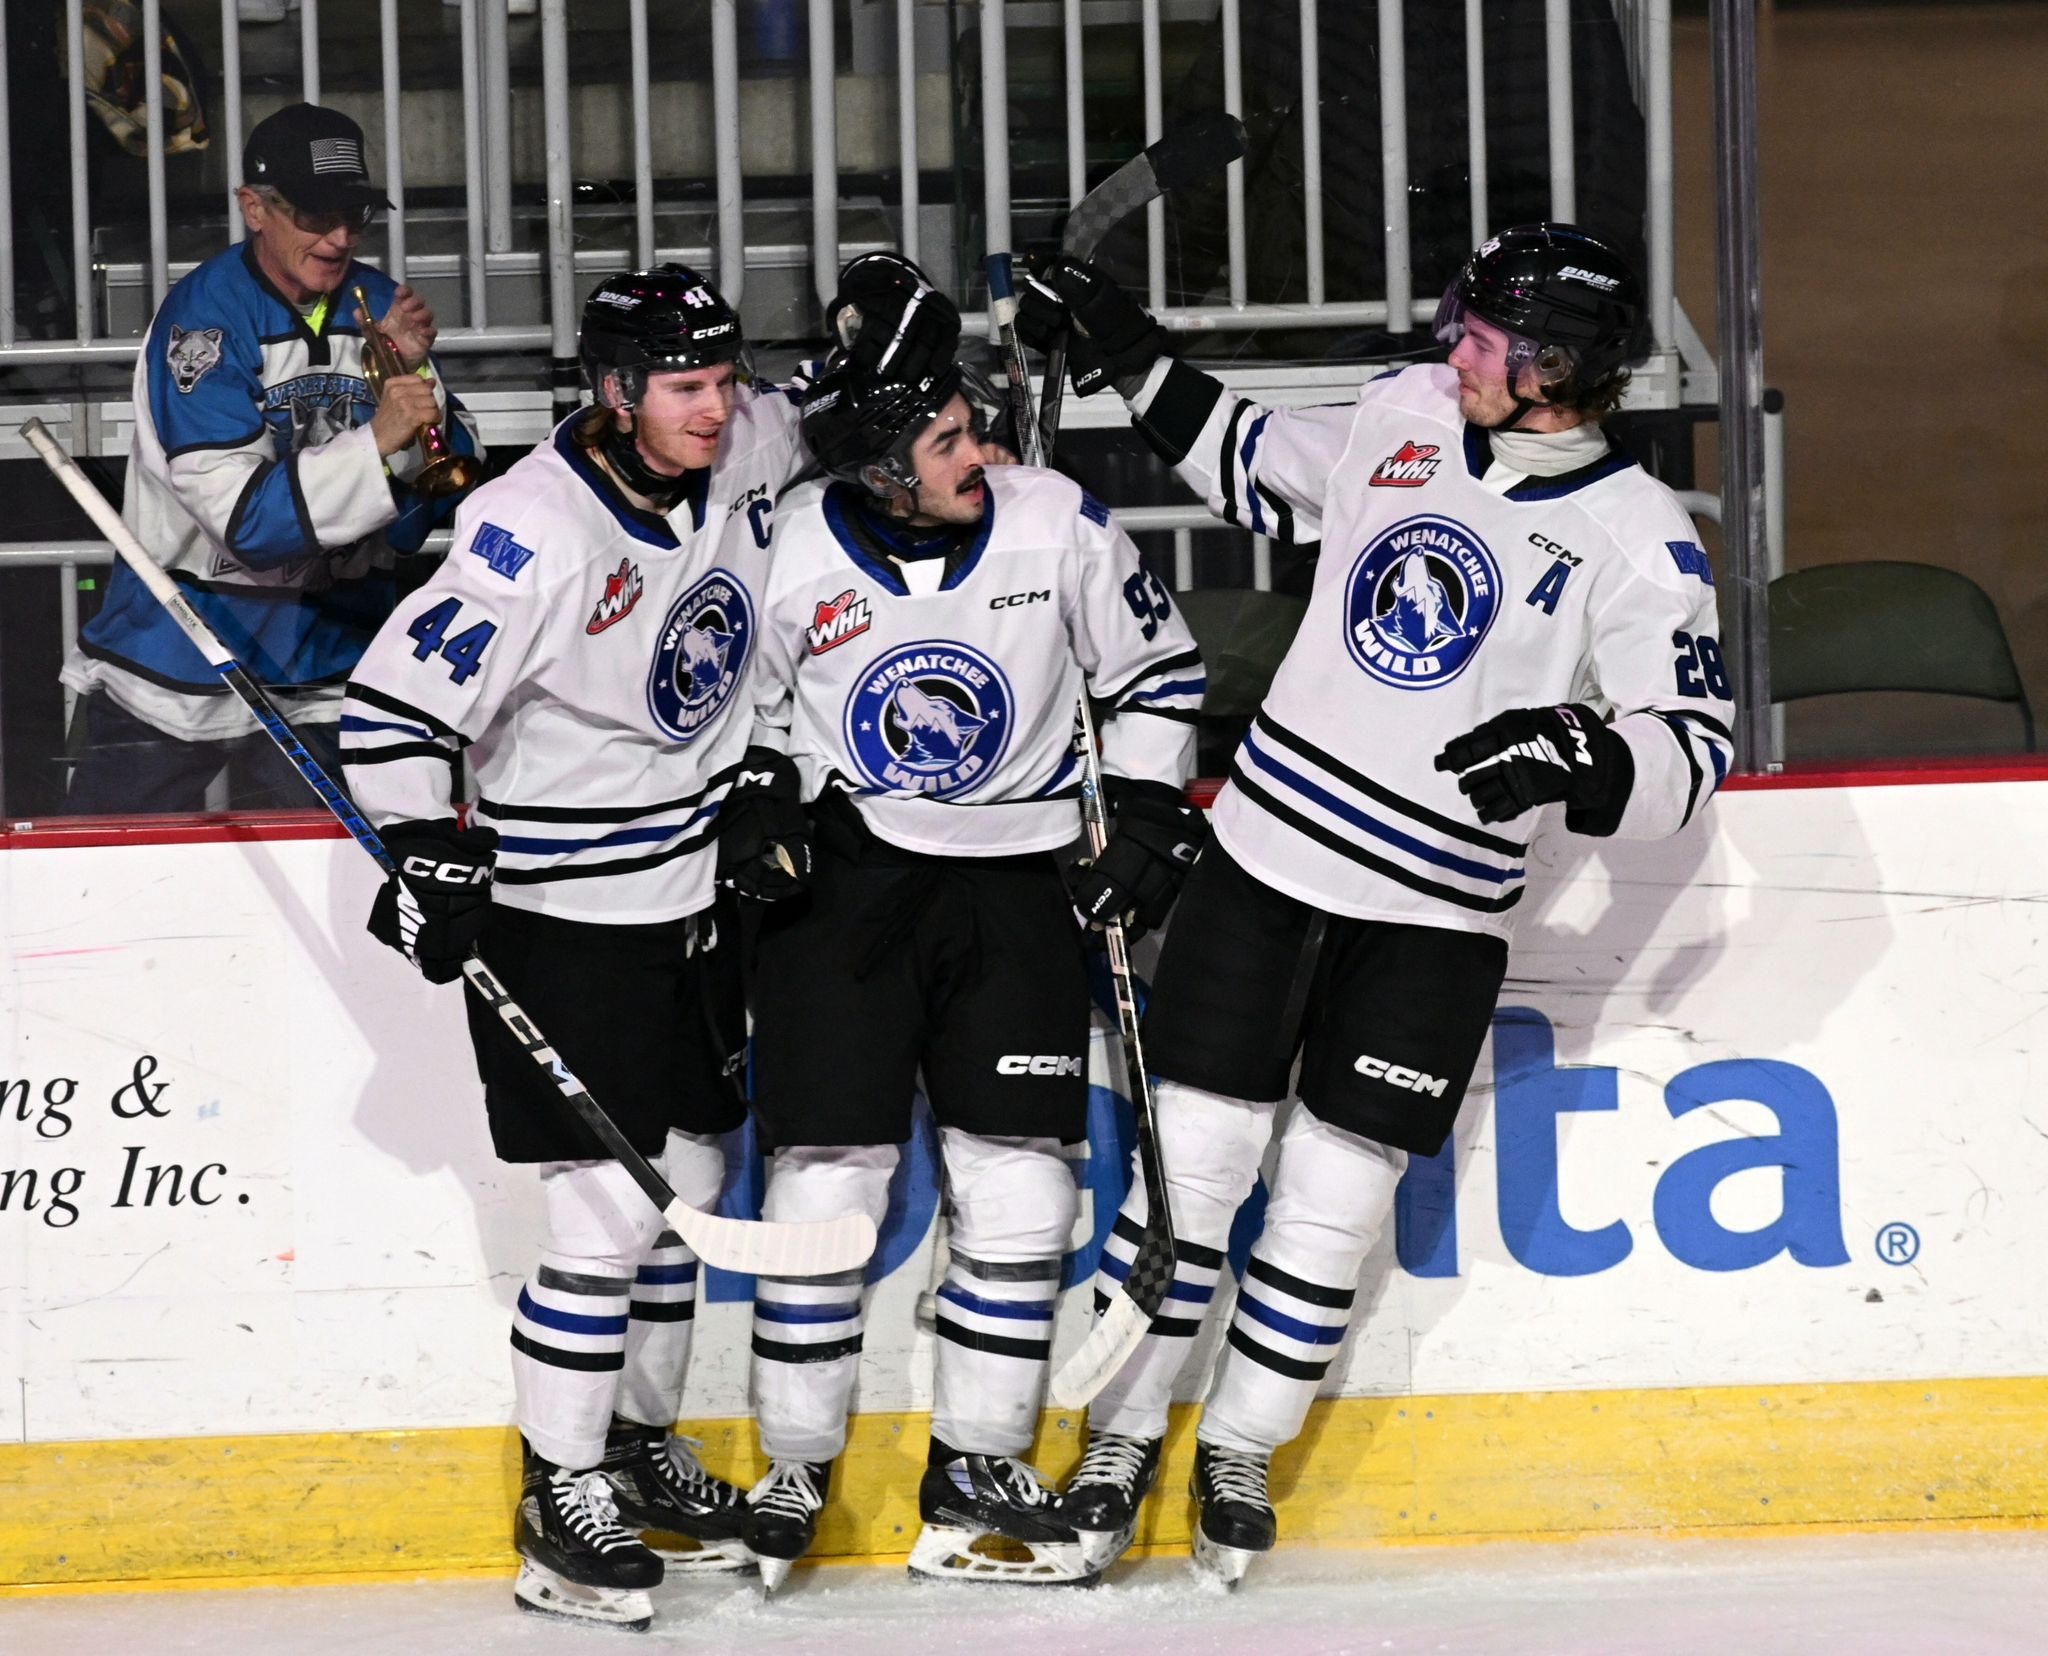 Graham Sward, Matthew Savoie, and Conor Geekie celebrate a goal on the ice.